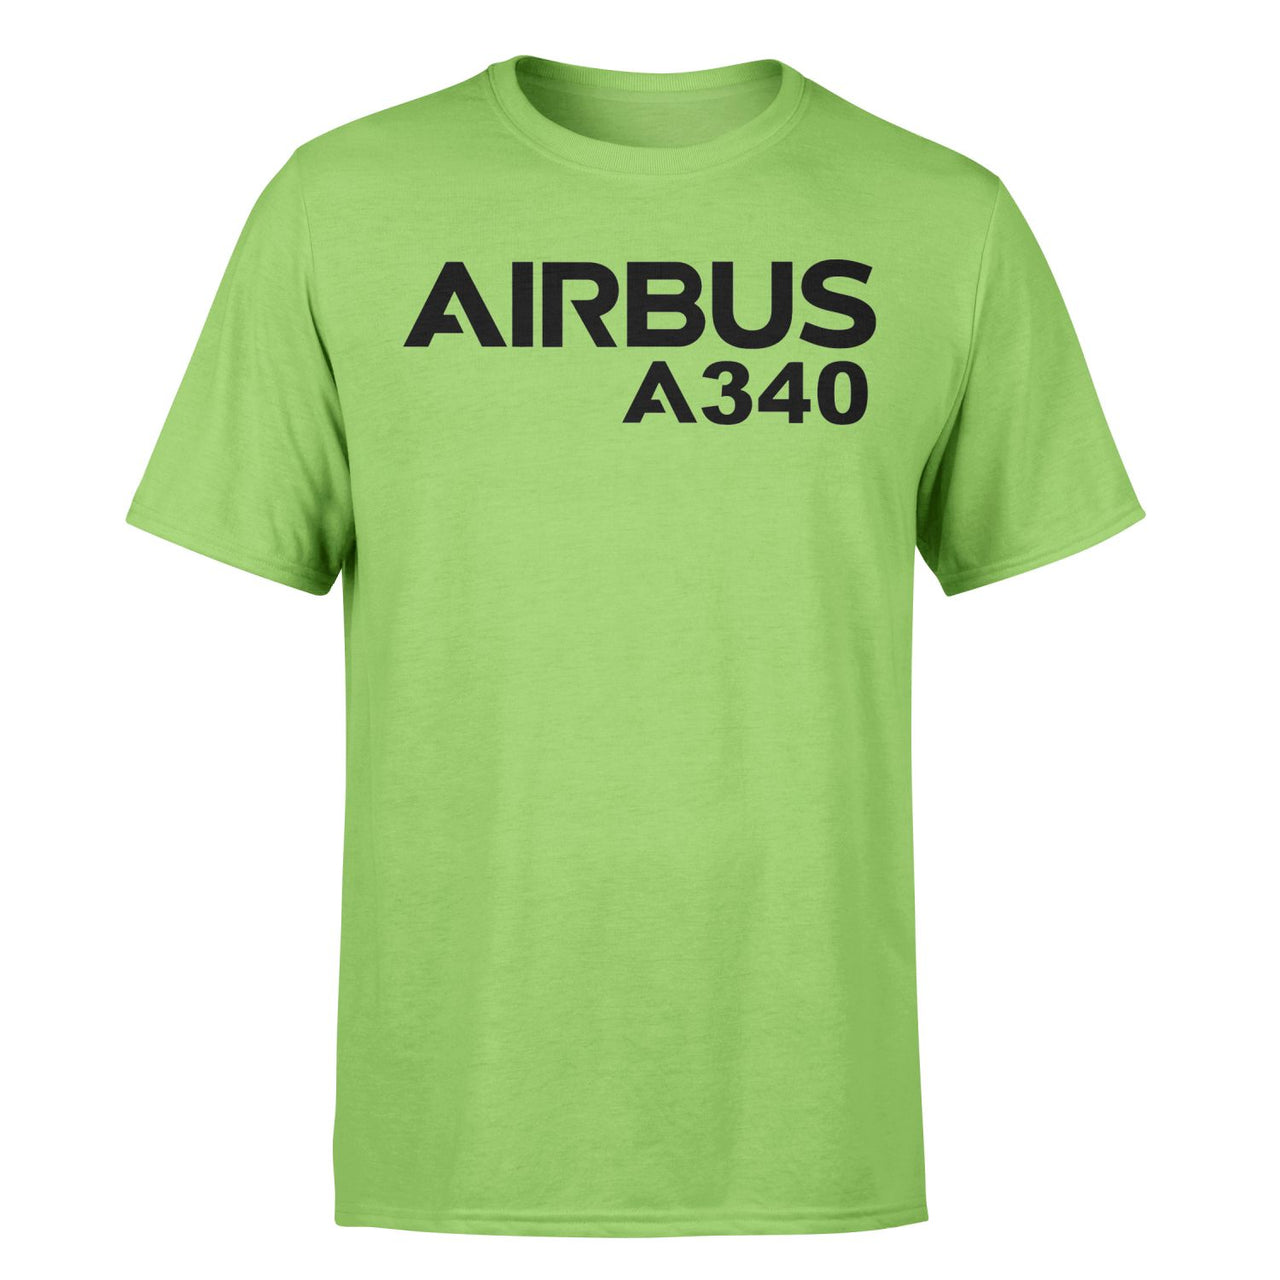 Airbus A340 & Text Designed T-Shirts